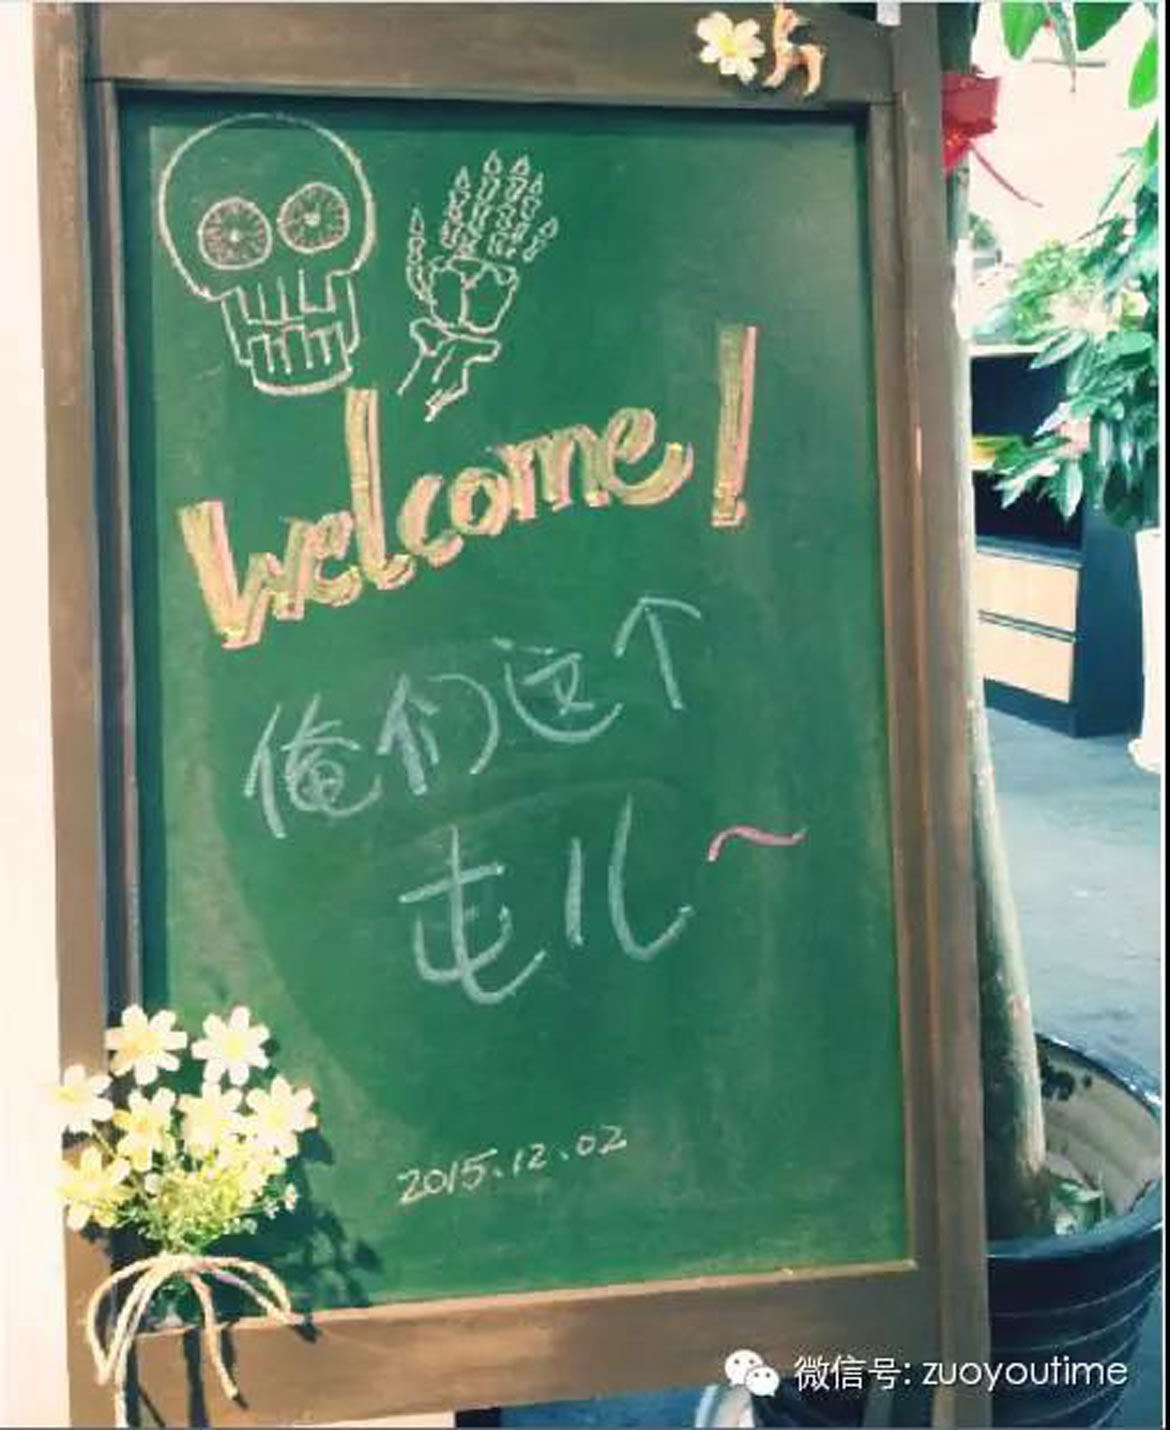 Welcome 俺们这个屯儿